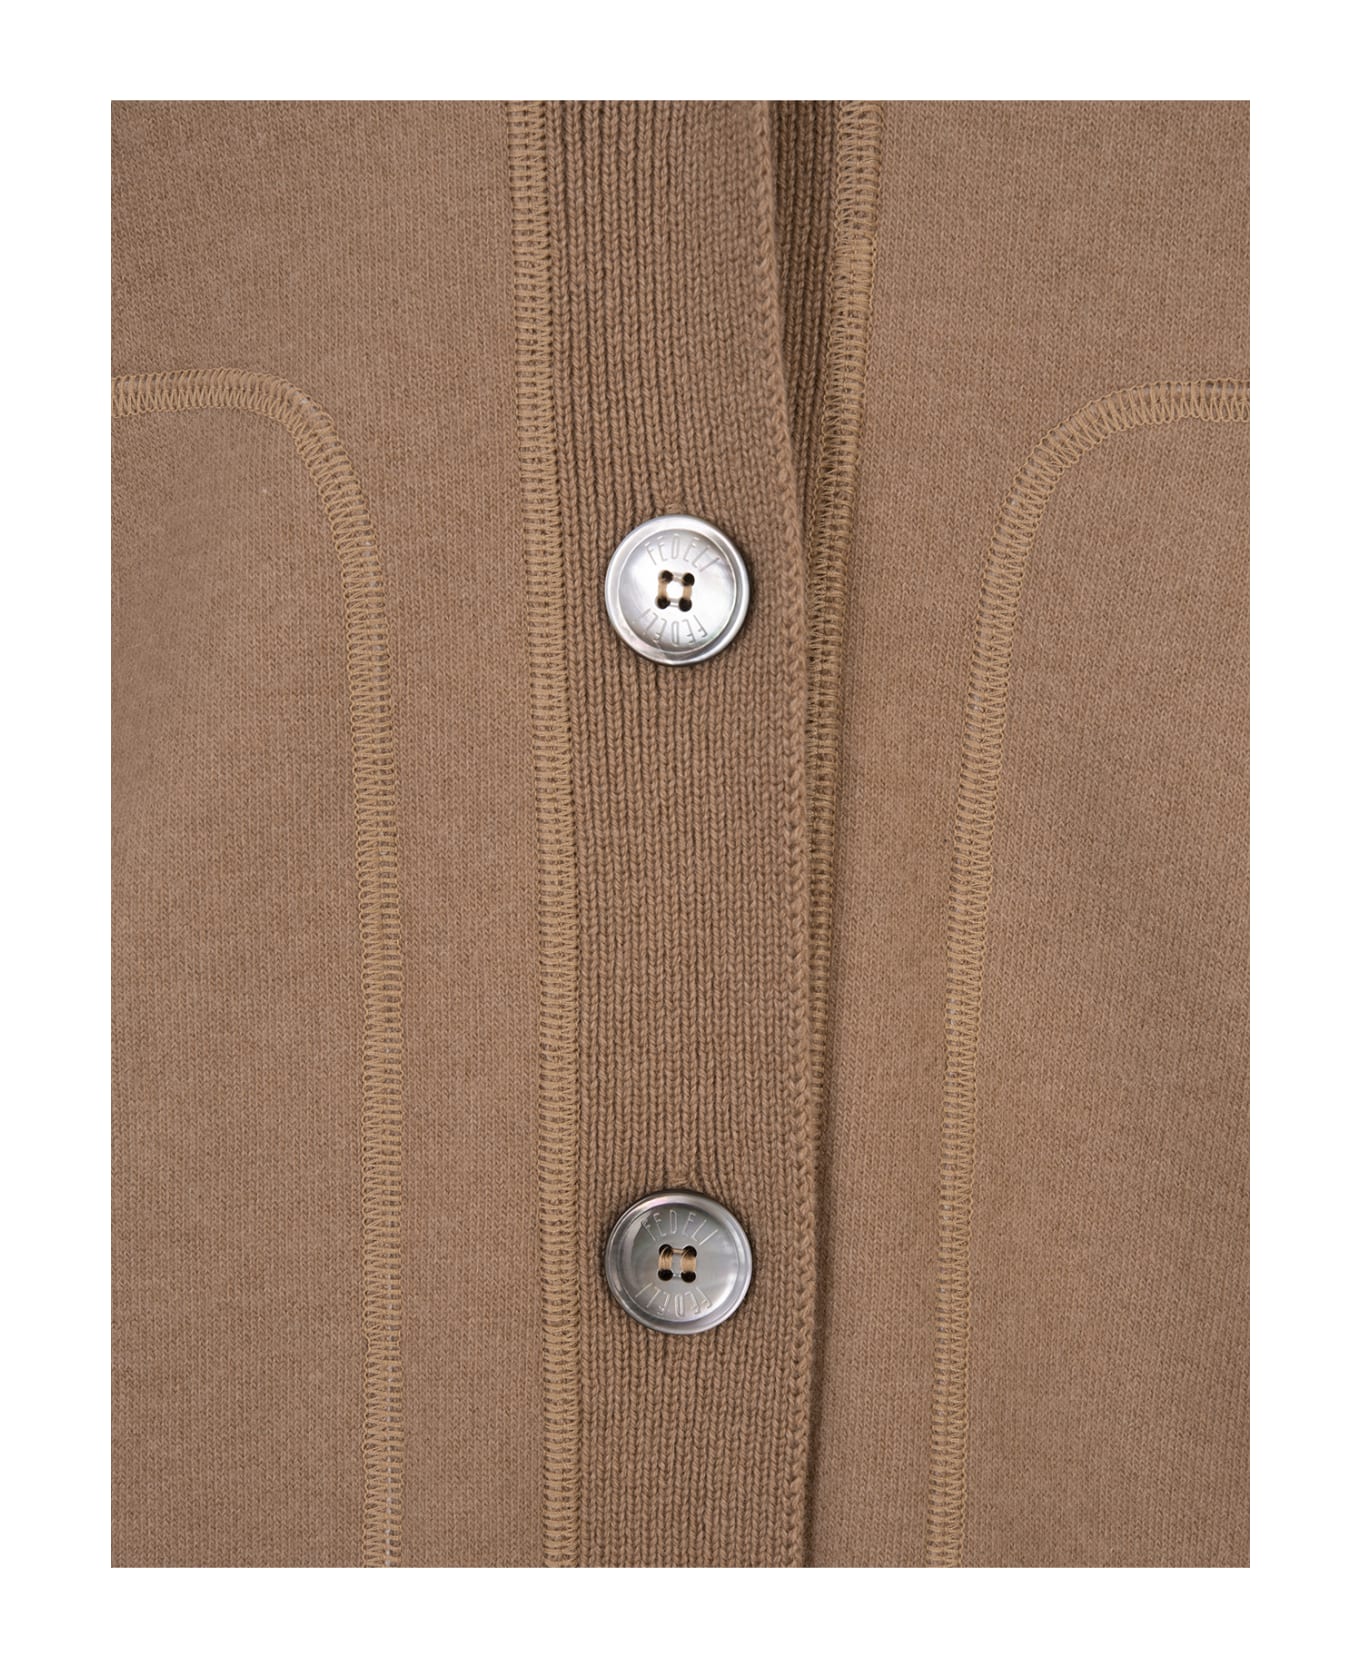 Fedeli Maxi Cardigan With Buttons In Camel Cashmere - Brown